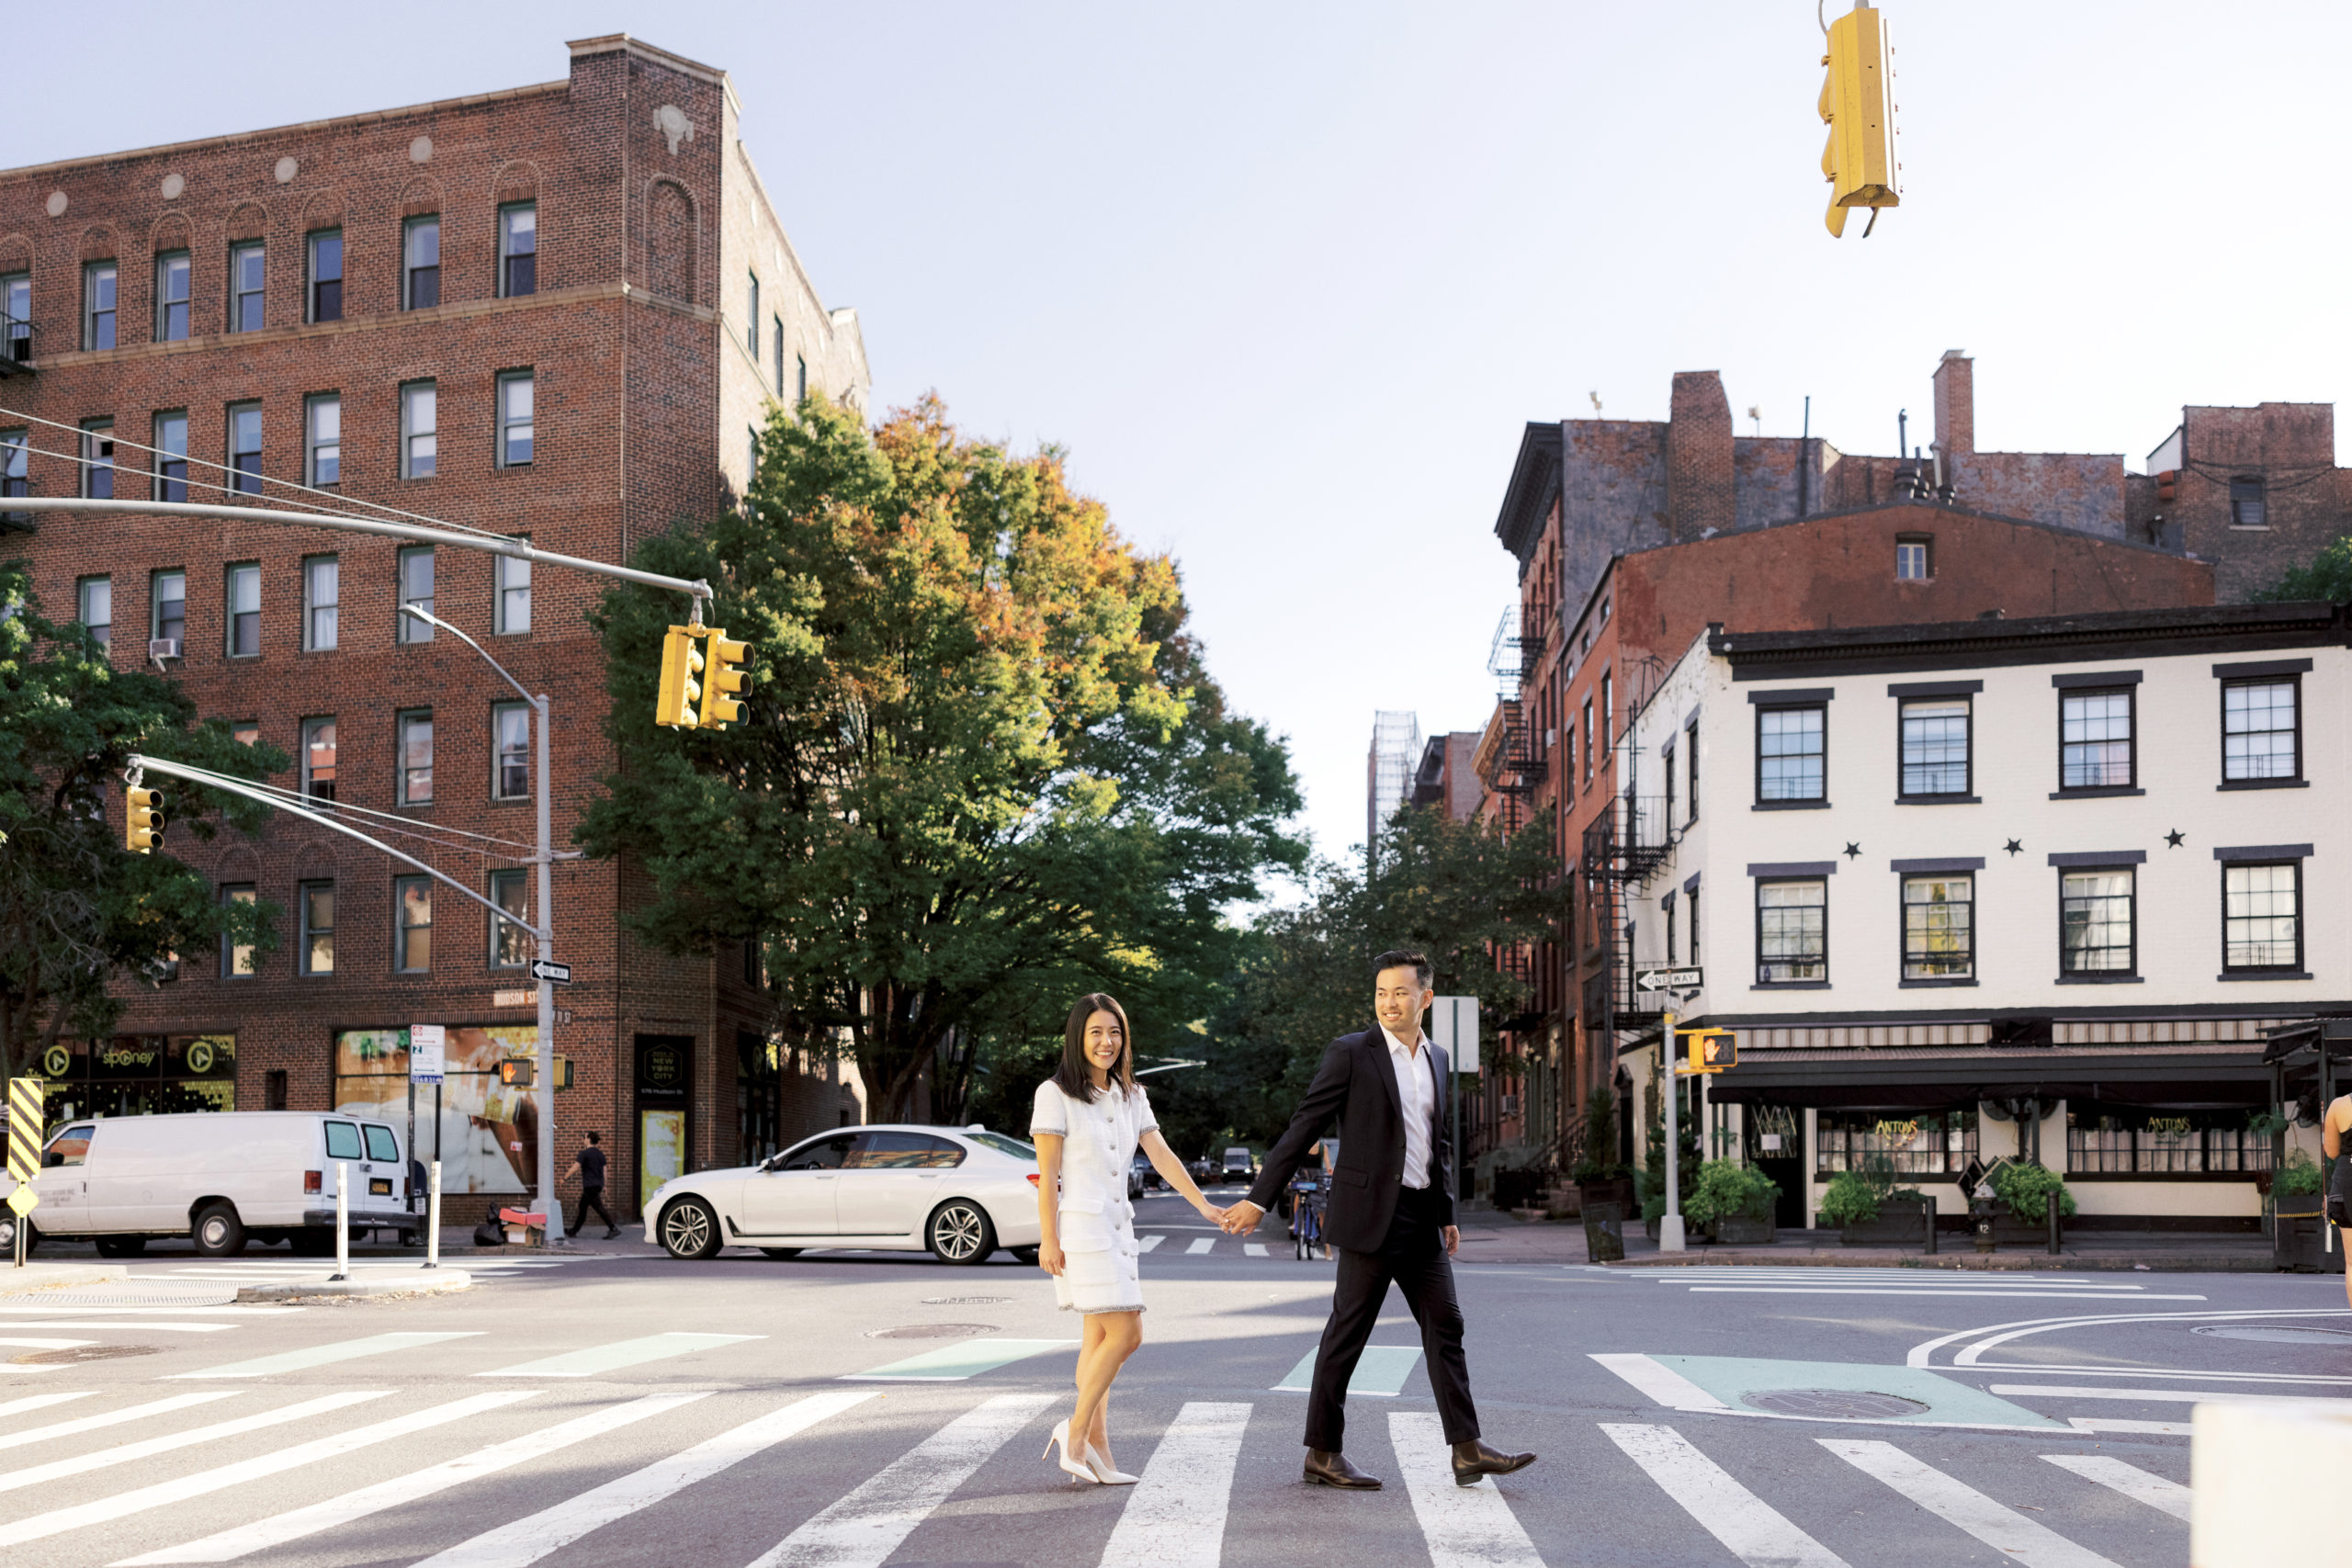 The engaged couple are crossing the street. Professional Engagement Photographer image by Jenny Fu Studio 